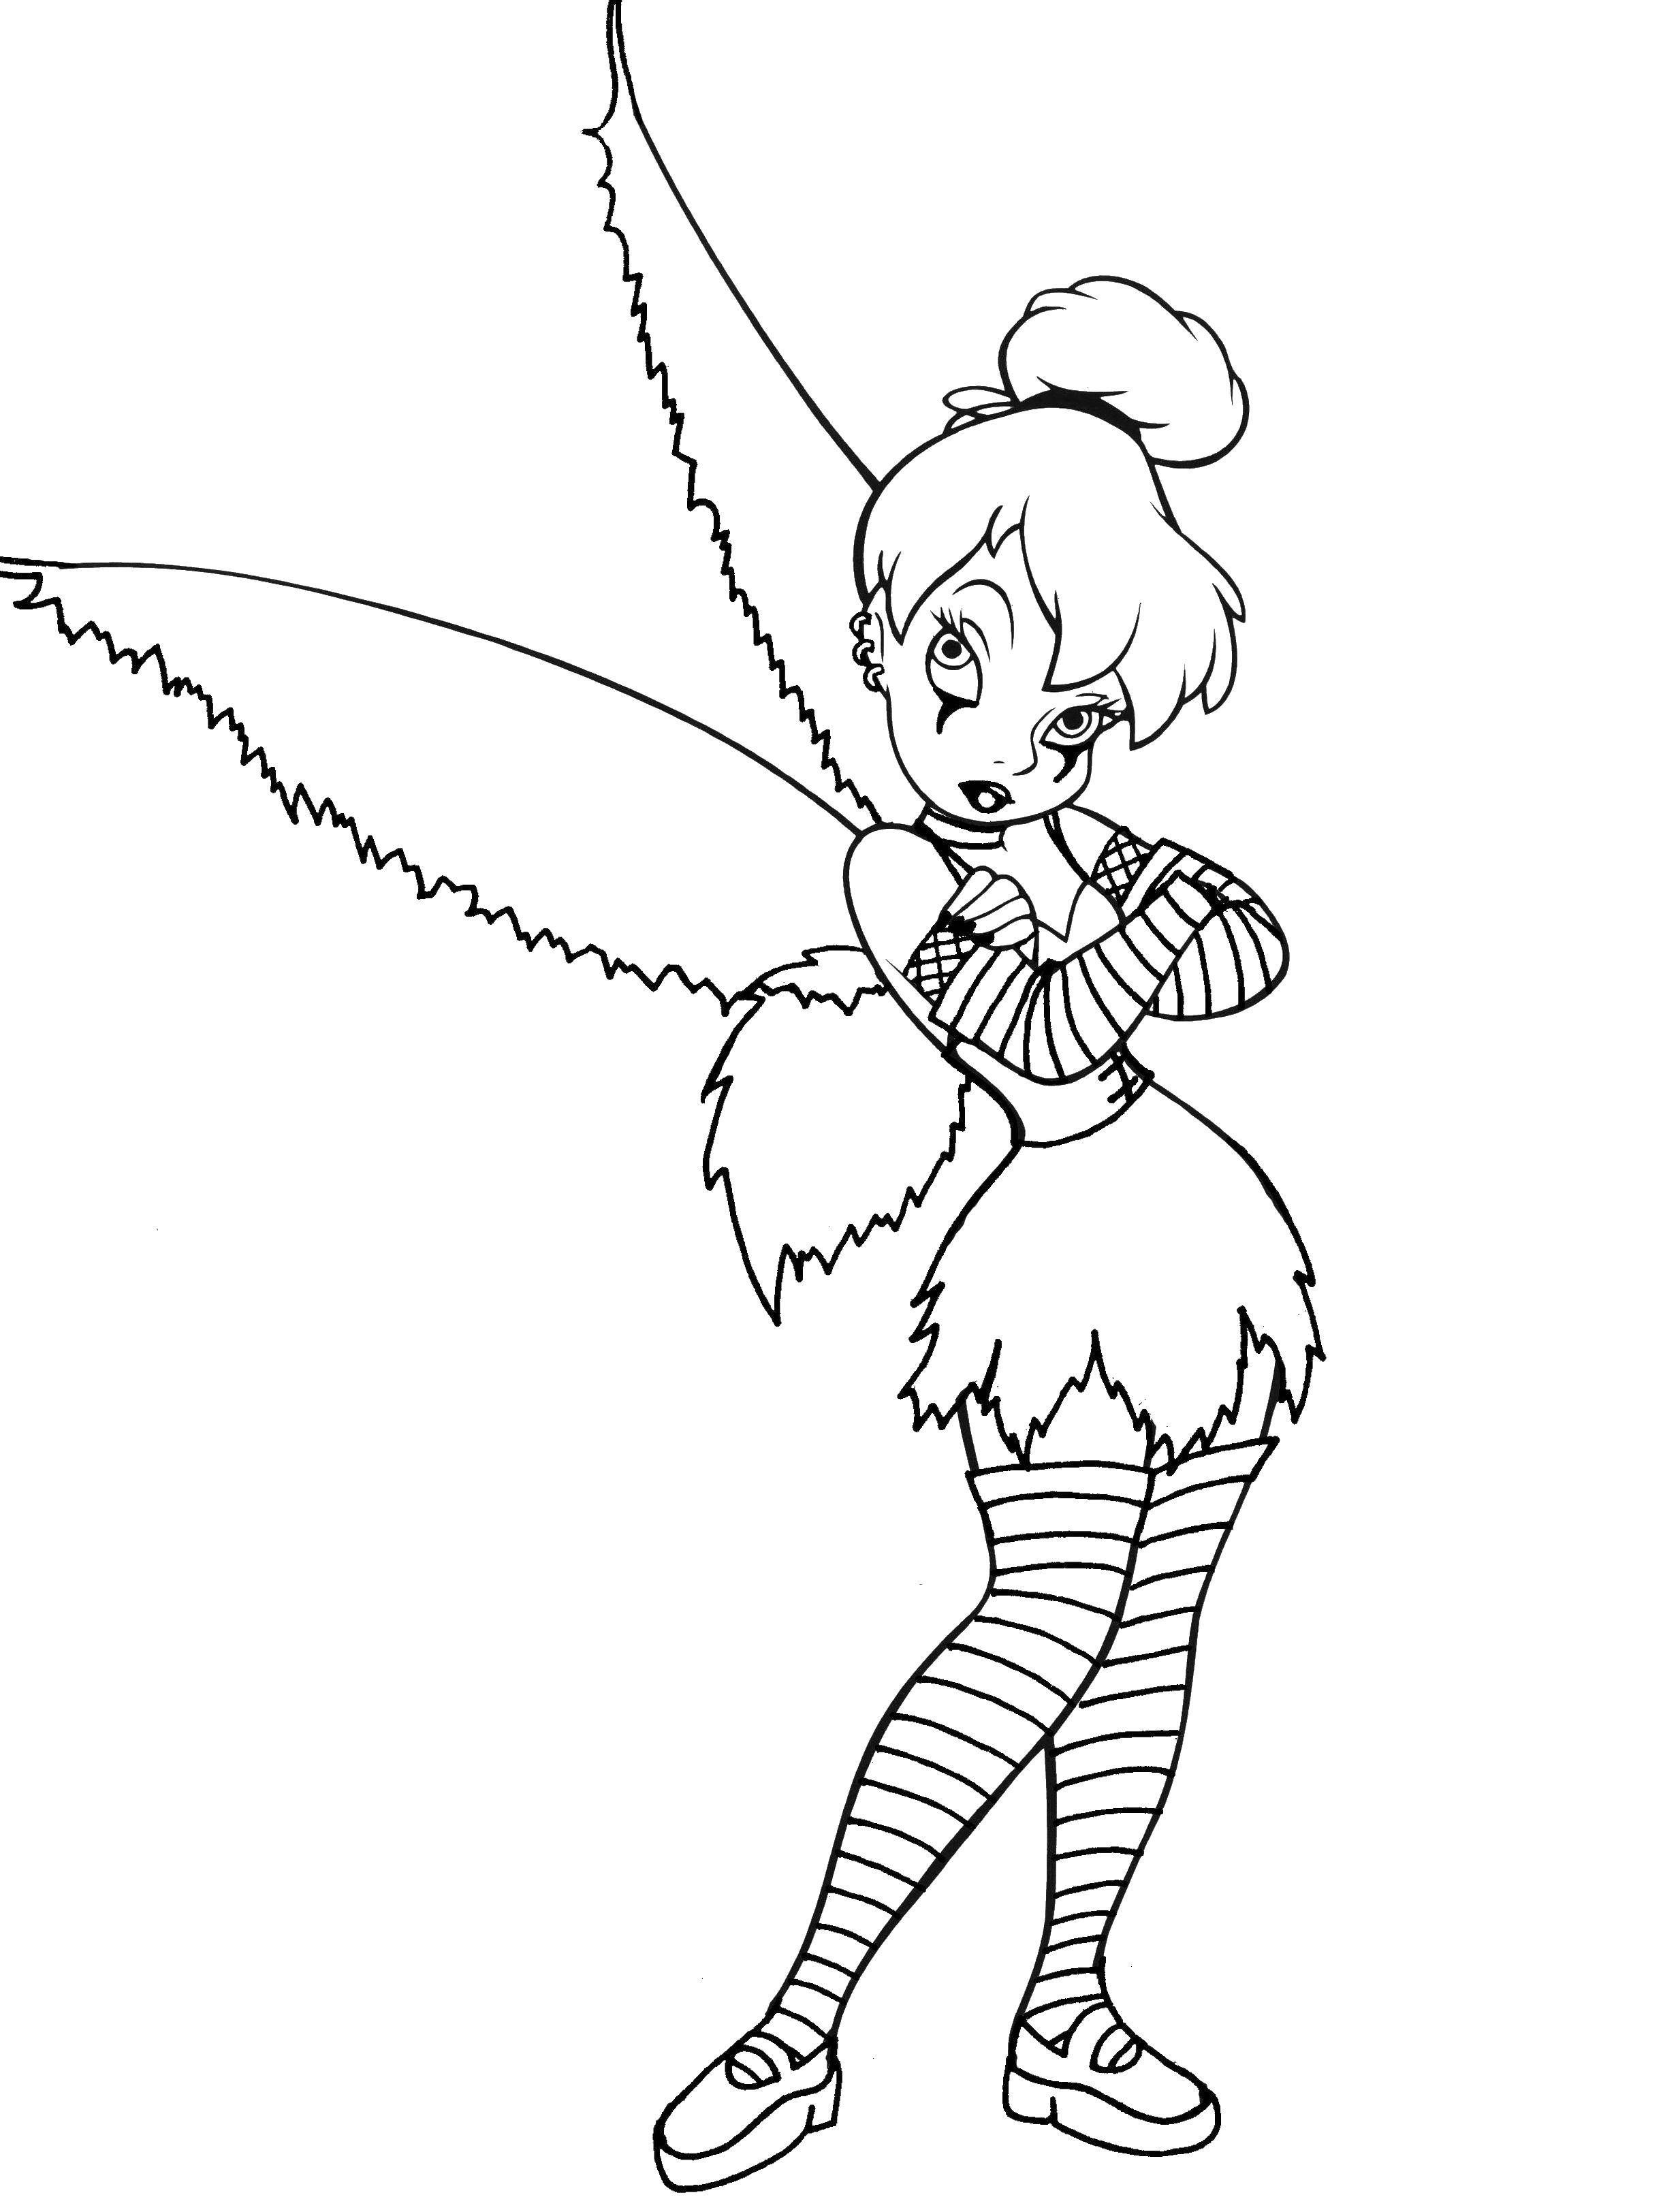 Coloring Fairy. Category Cartoon character. Tags:  fairy.